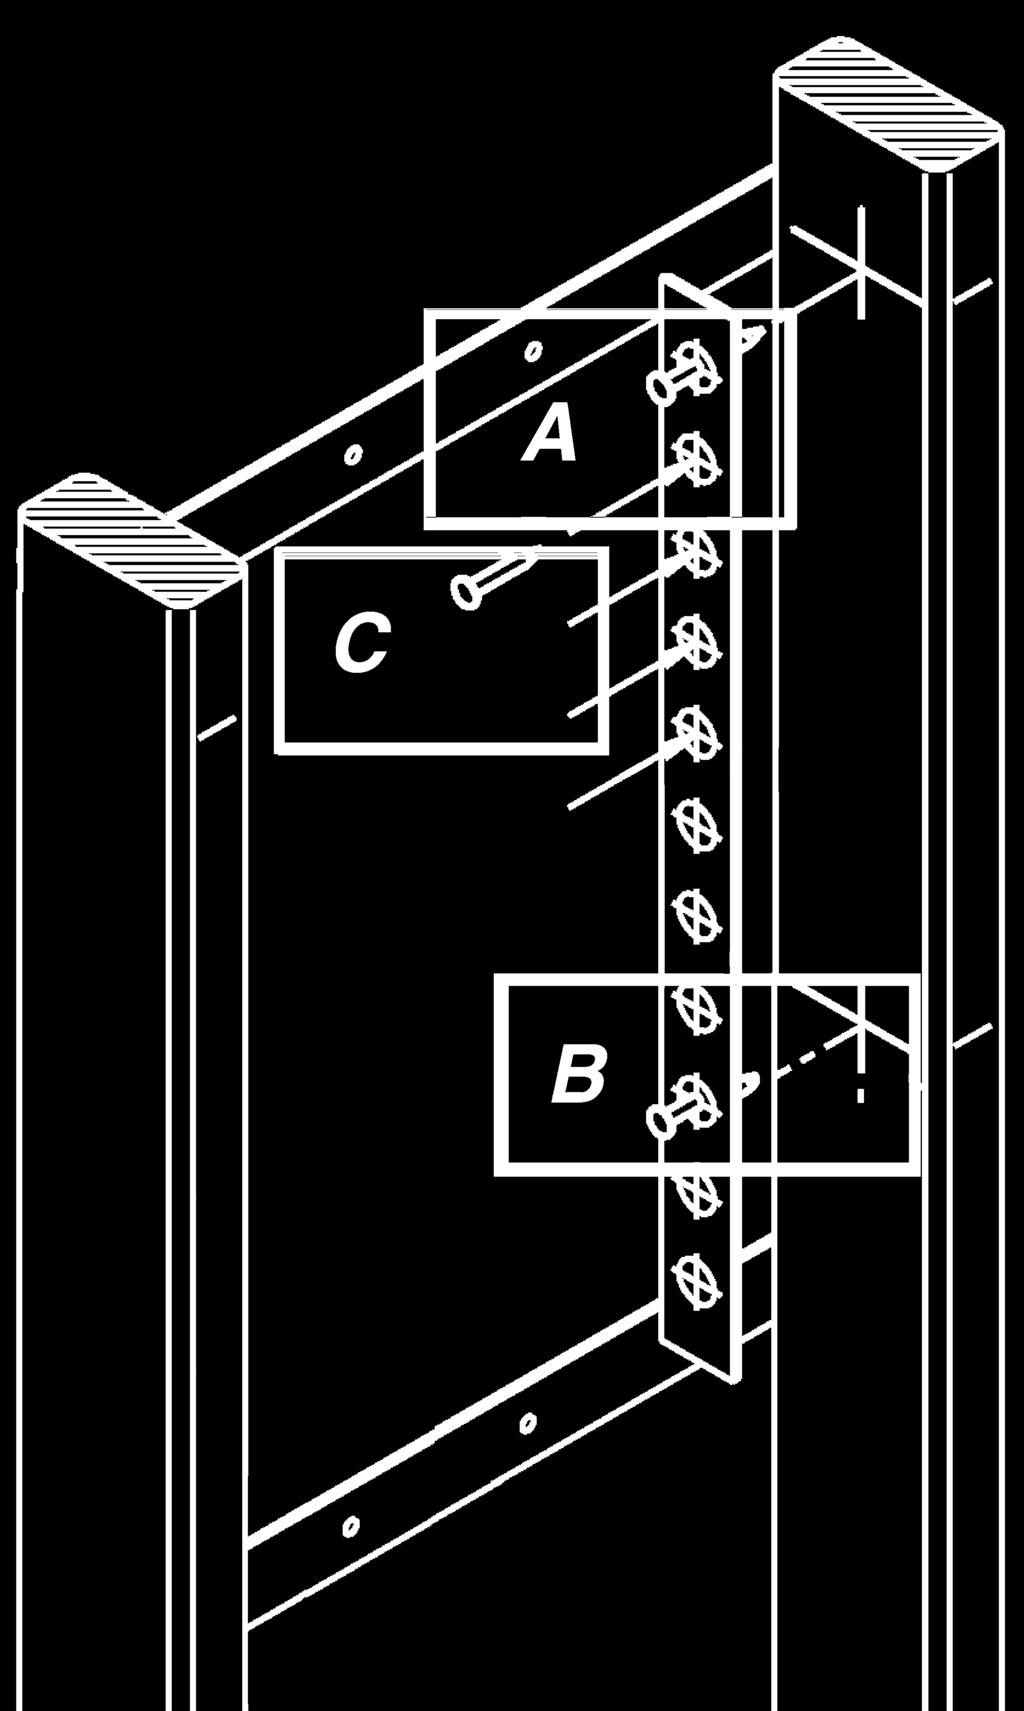 5. Standing in front of the wall, using a framing square or straight edge, mark the center line position of the top and bottom ports onto both studs. (See illustration.) 9.